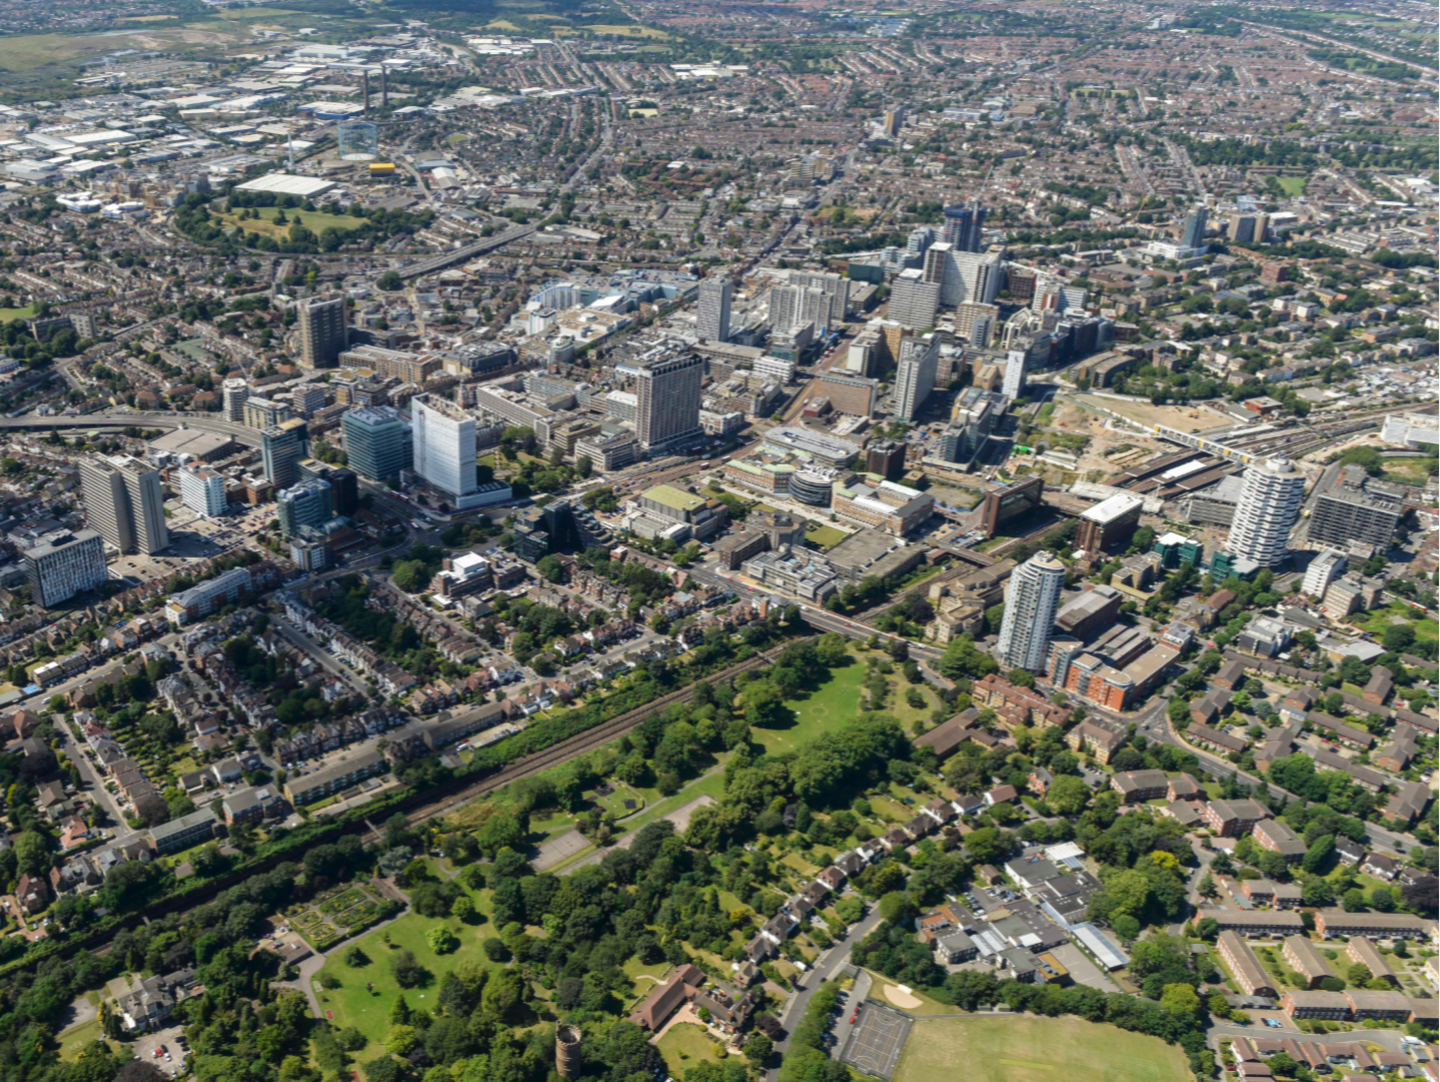 An aerial view of Croydon town centre